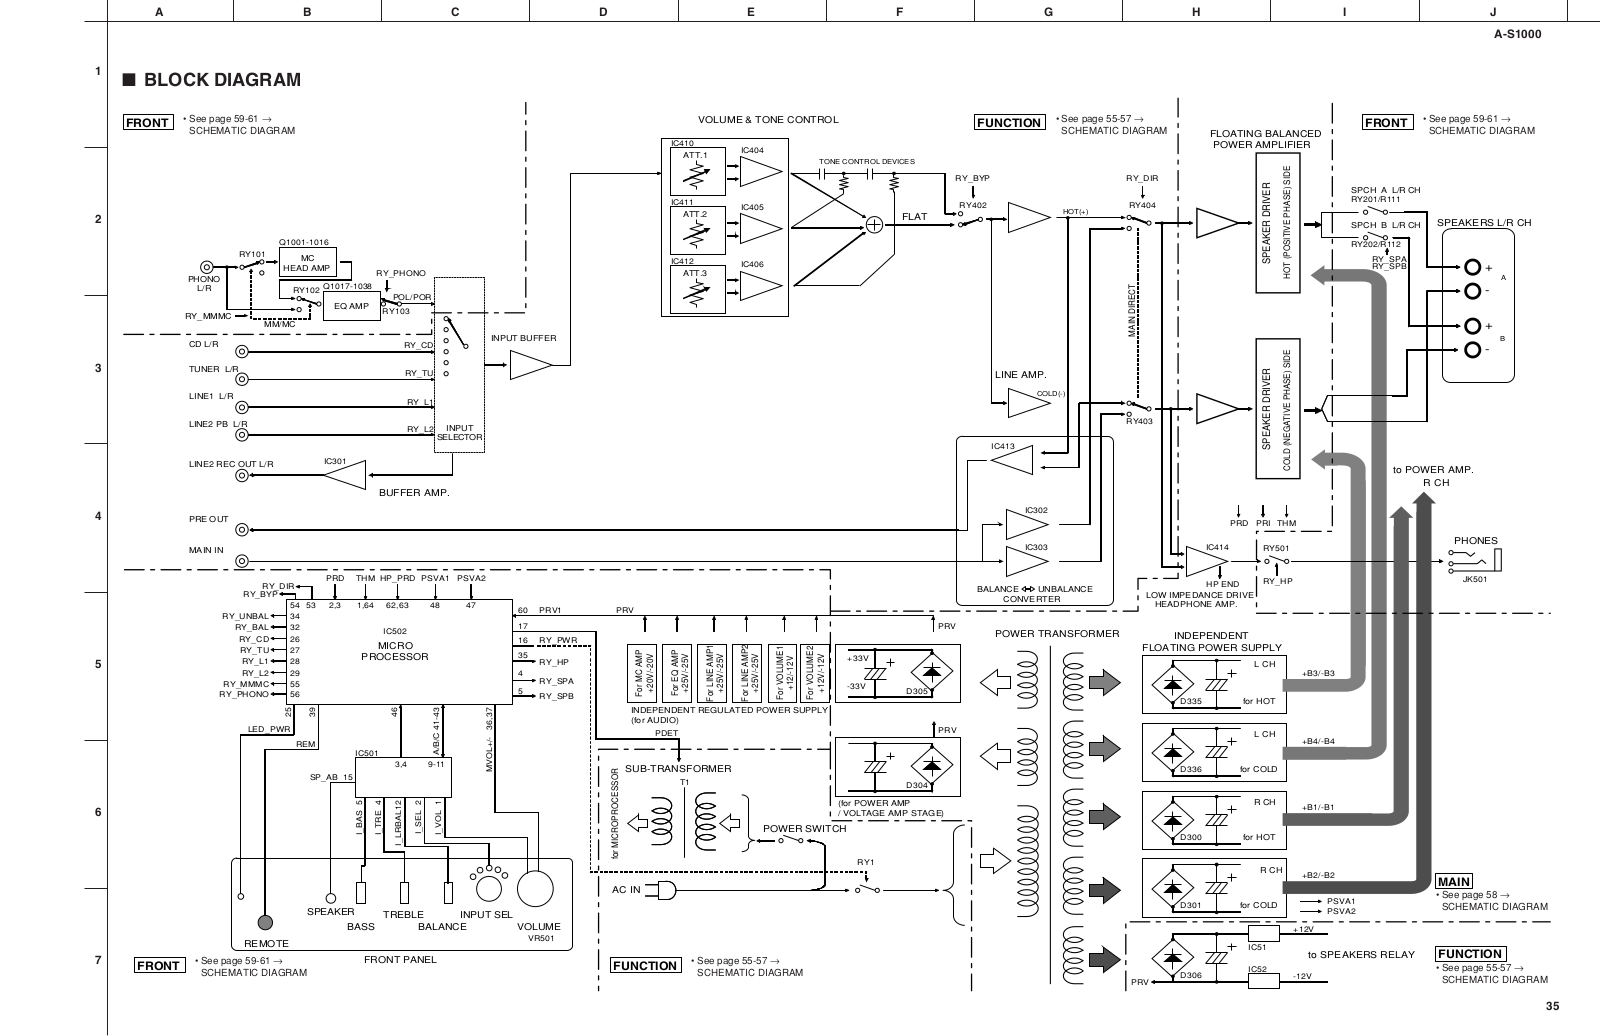 Yamaha AS-1000 Schematic